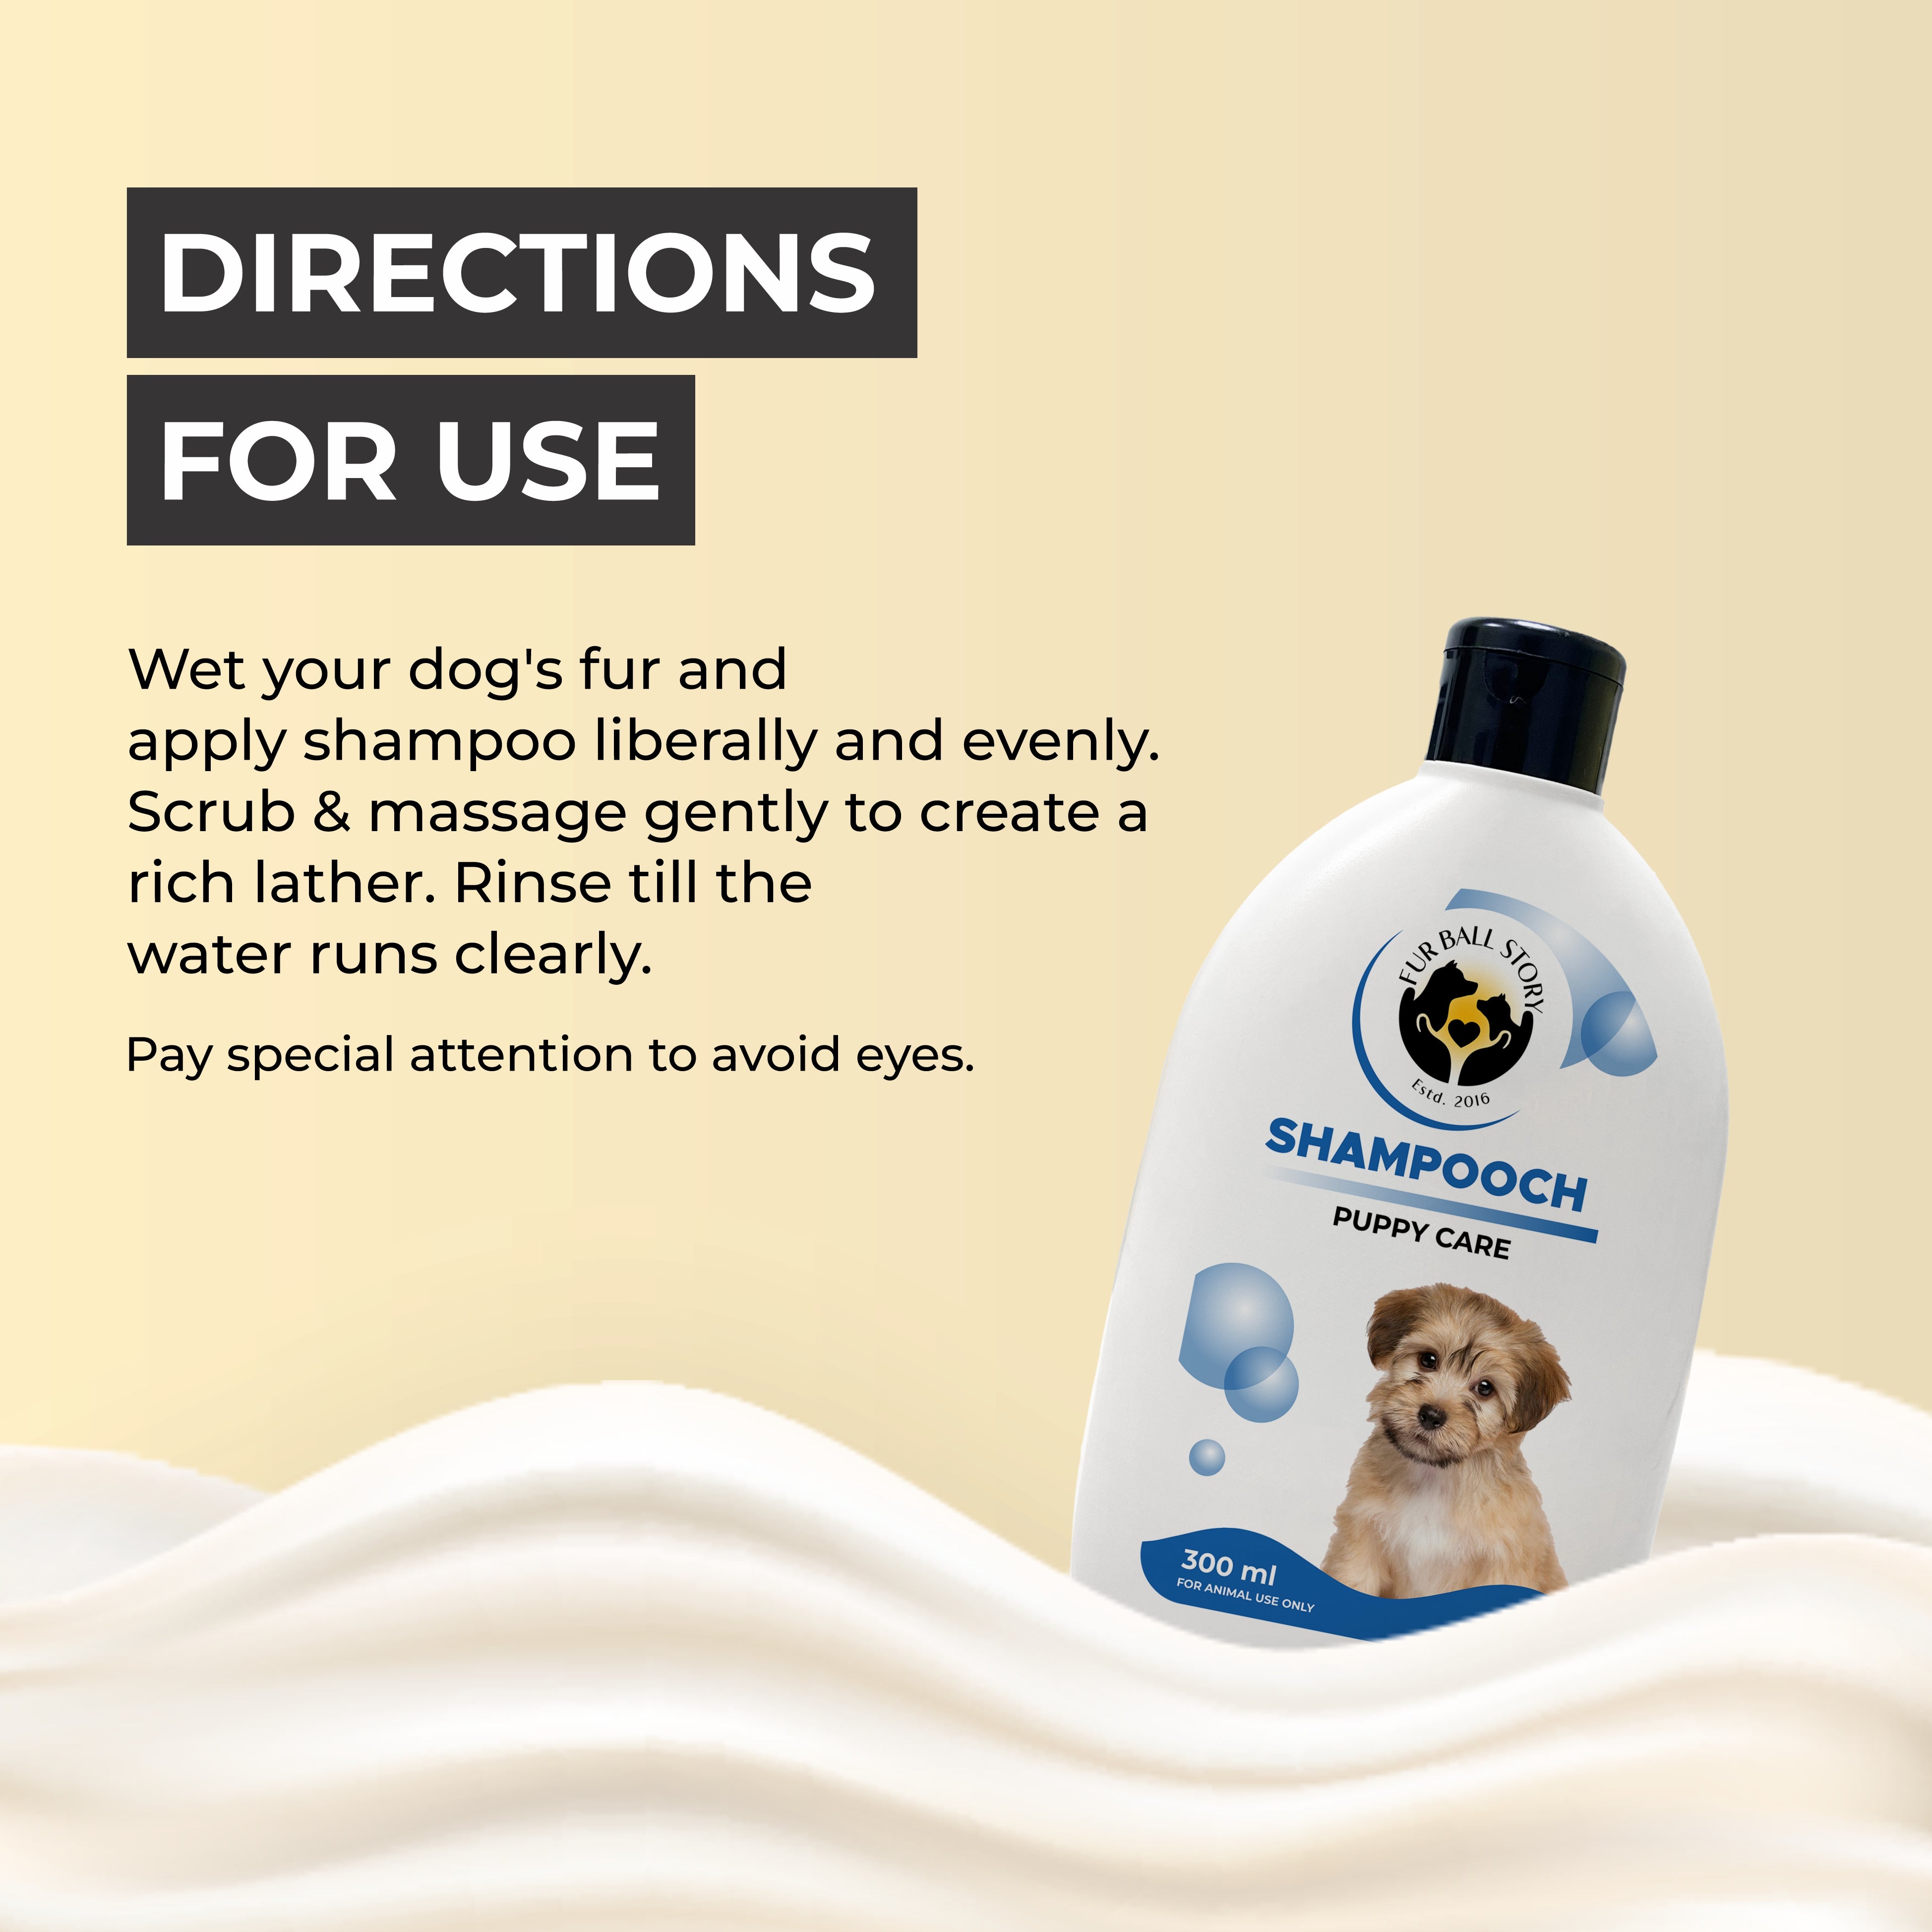 Shampooch: Shampoo For Puppy Care directions to use